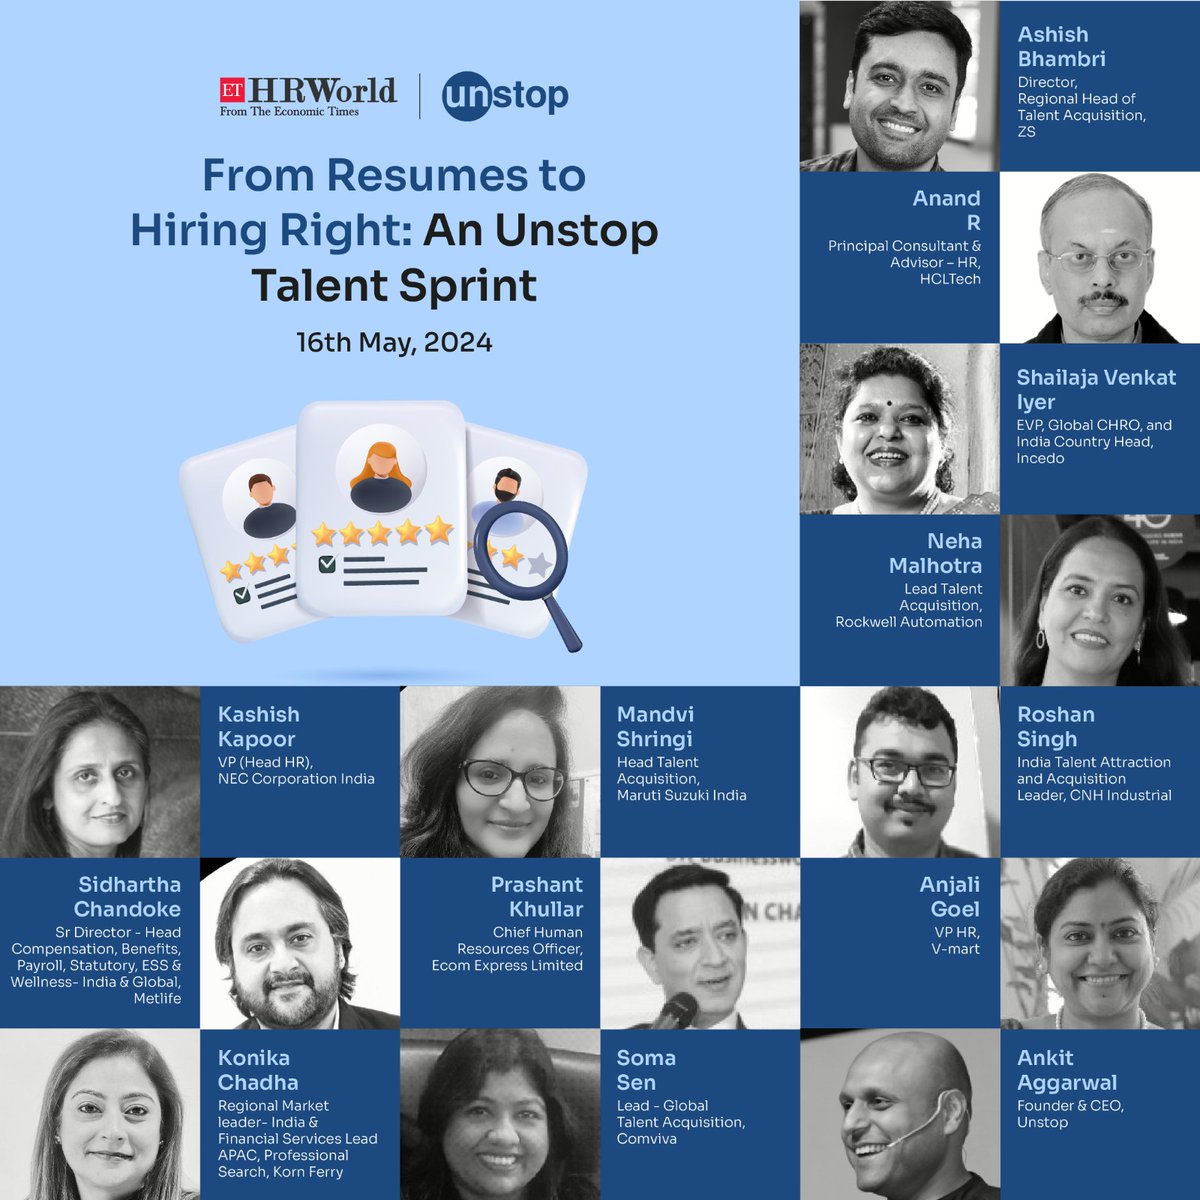 Rethink hiring with #Unstop and #ETHRWorld. From resumes to skill-based hiring, discover innovative talent strategies in today's dynamic workplace. 

#TalentAcquisition #Retention #AI #HiringRight